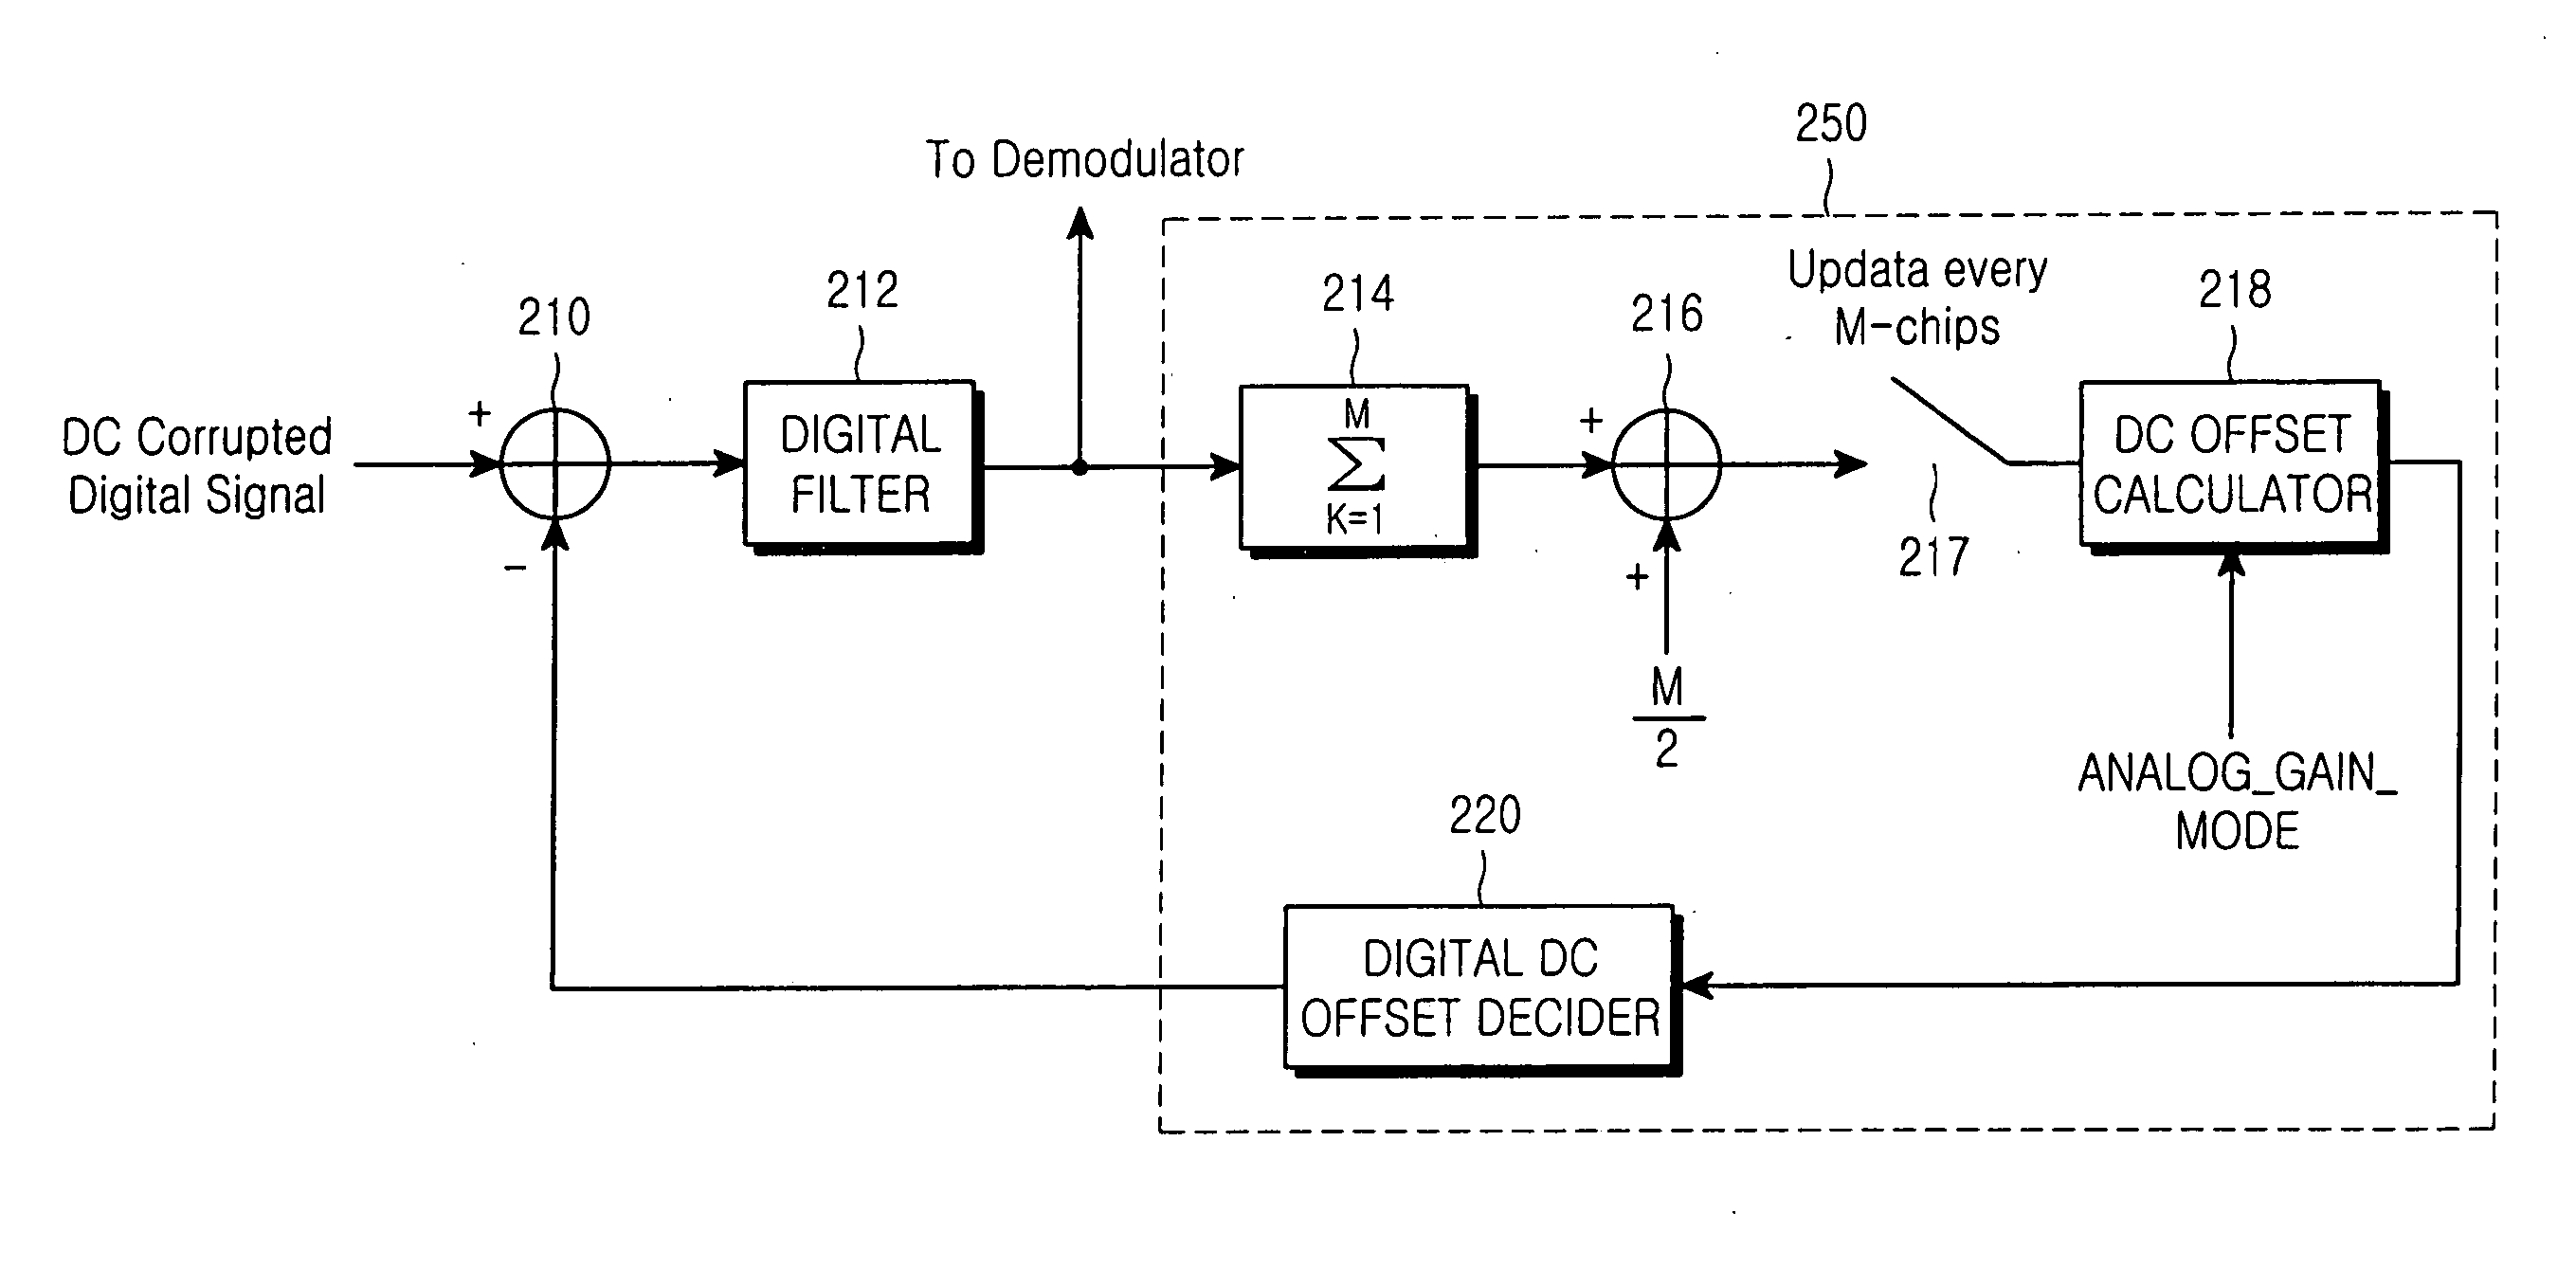 Apparatus and method for removing DC offset in a frequency direct-conversion device